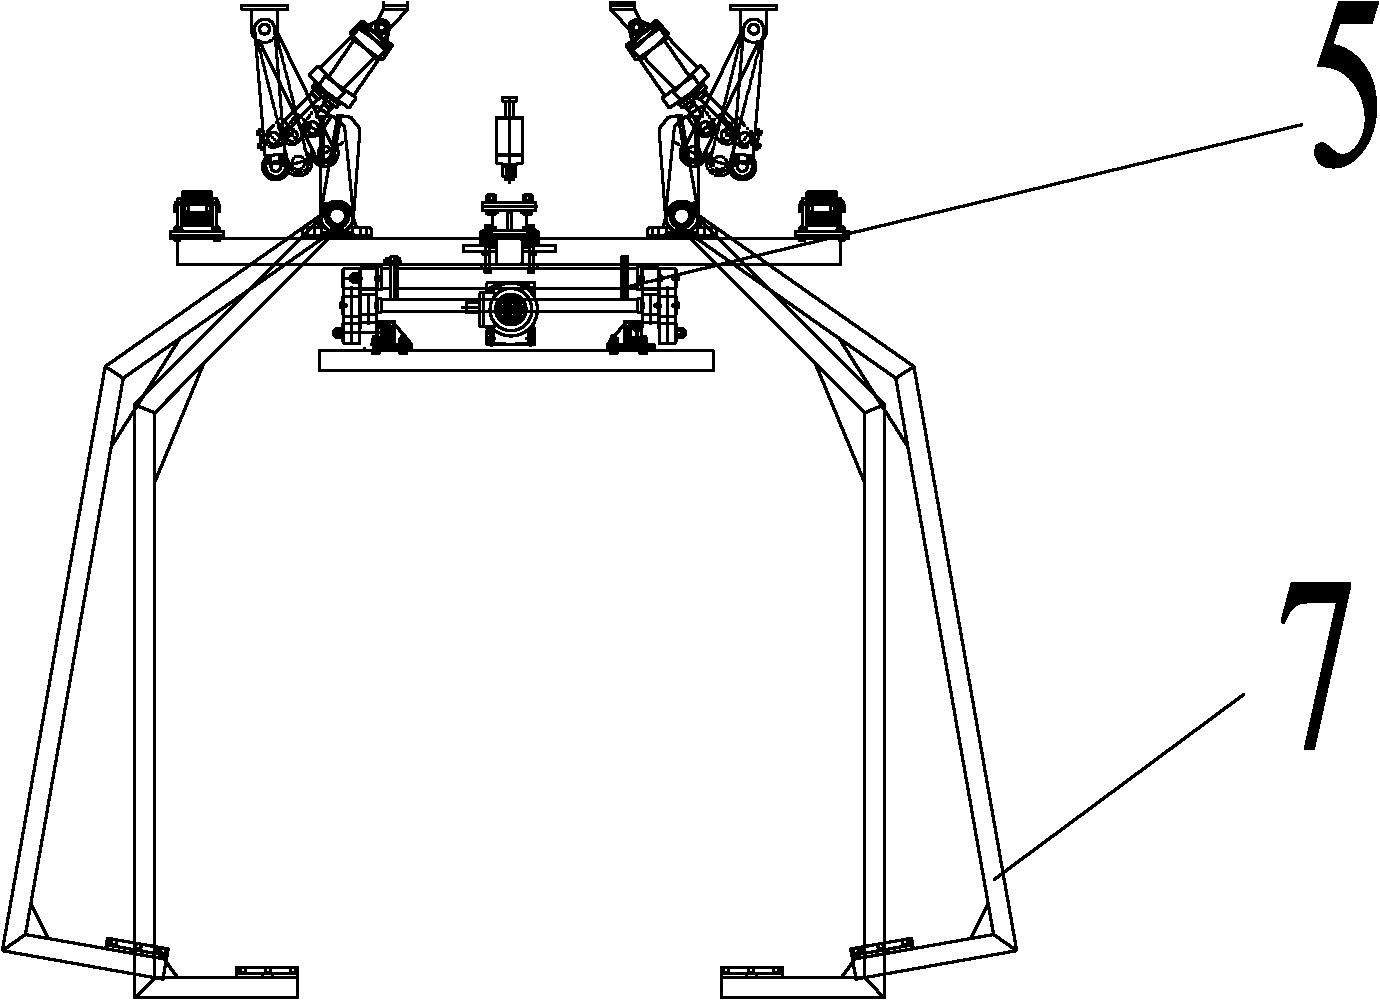 Overhead conveying system of disassembly line for scrapped automobile